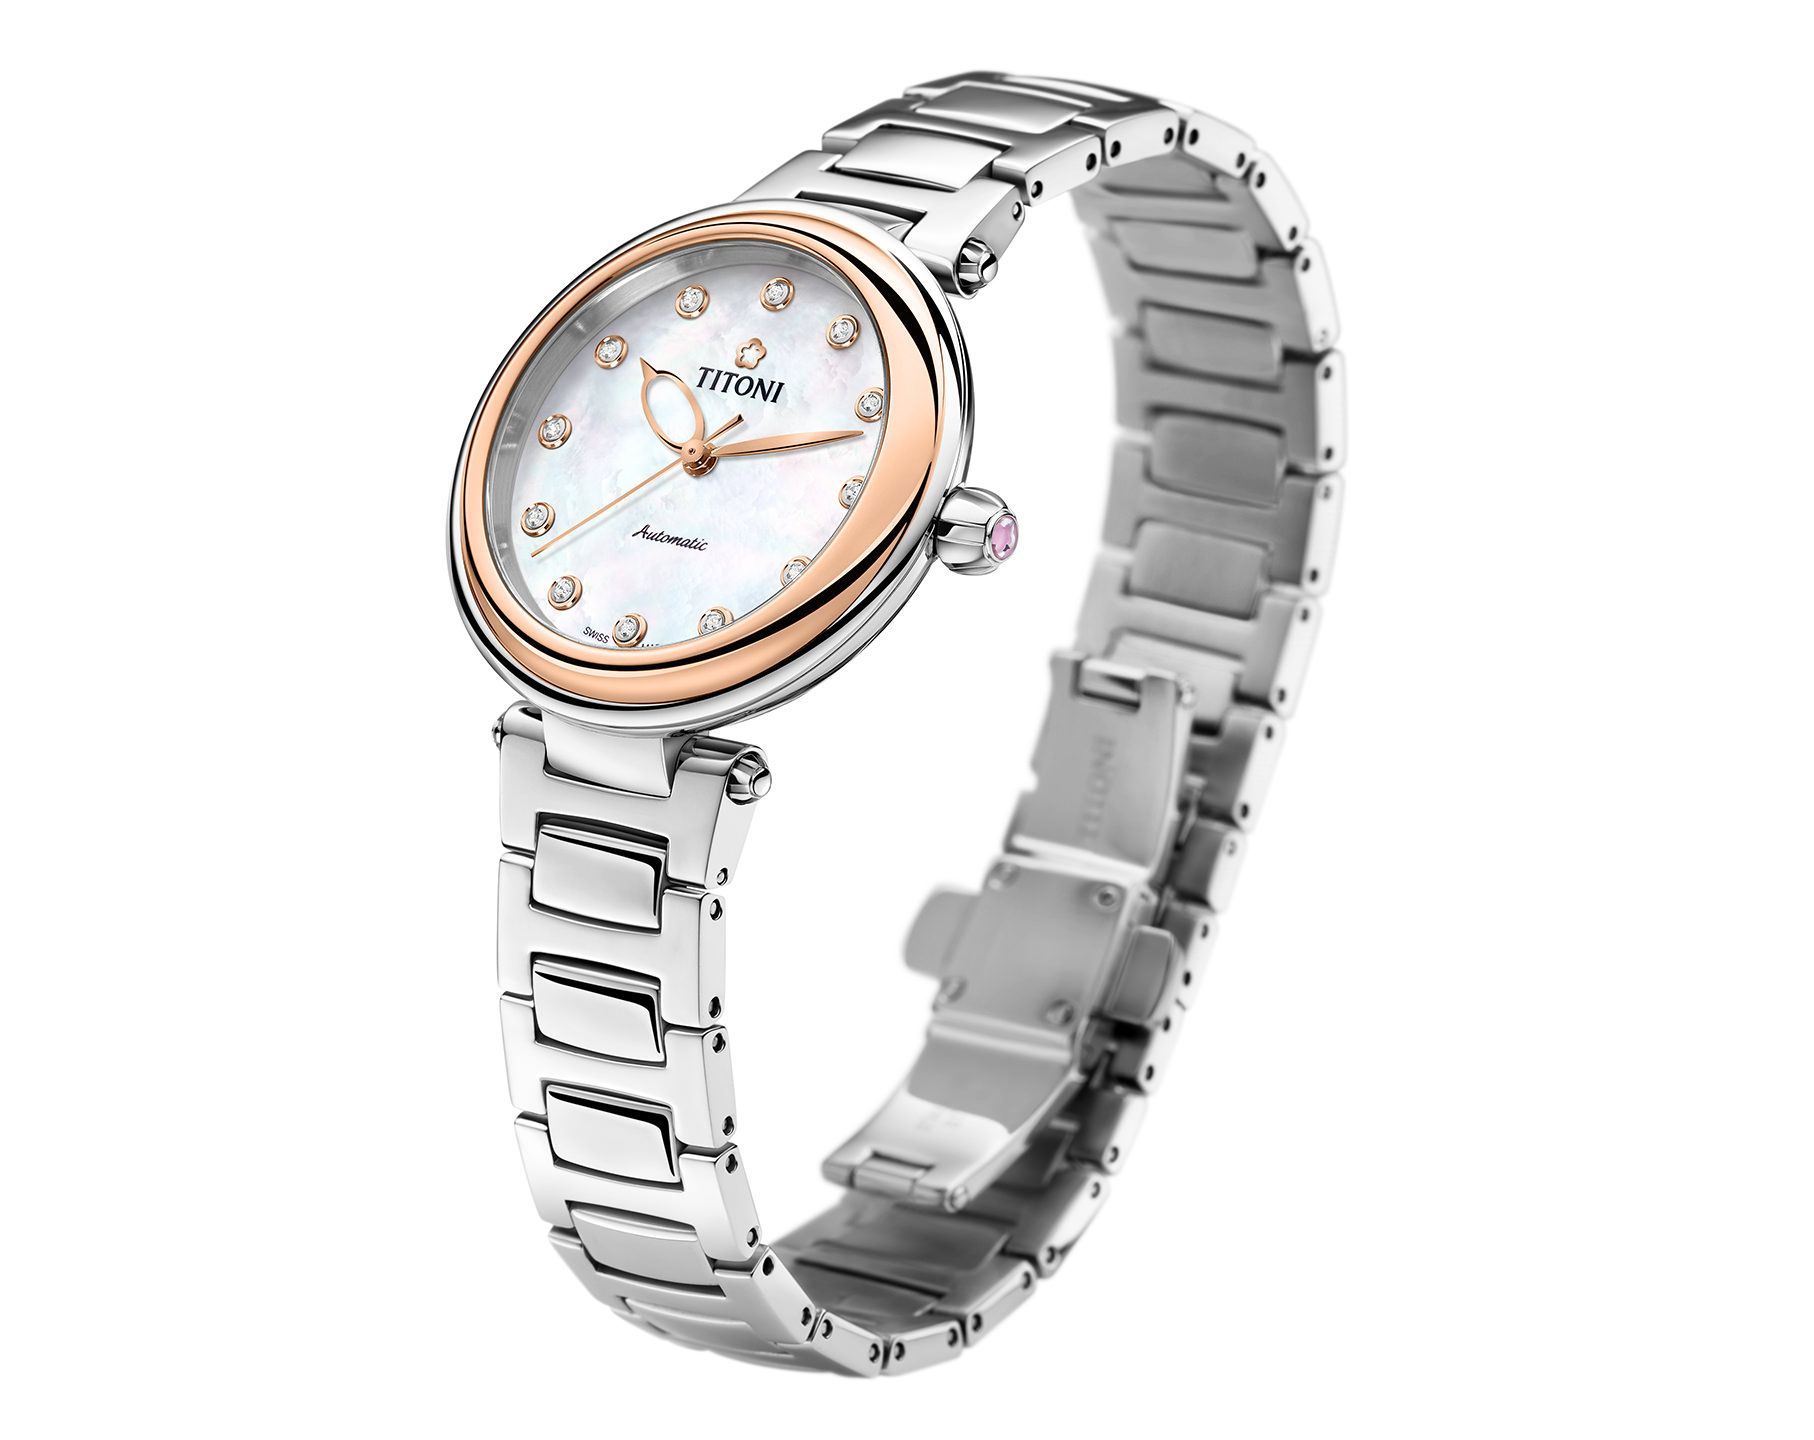 Titoni Miss Lovely  MOP Dial 33.5 mm Automatic Watch For Women - 2